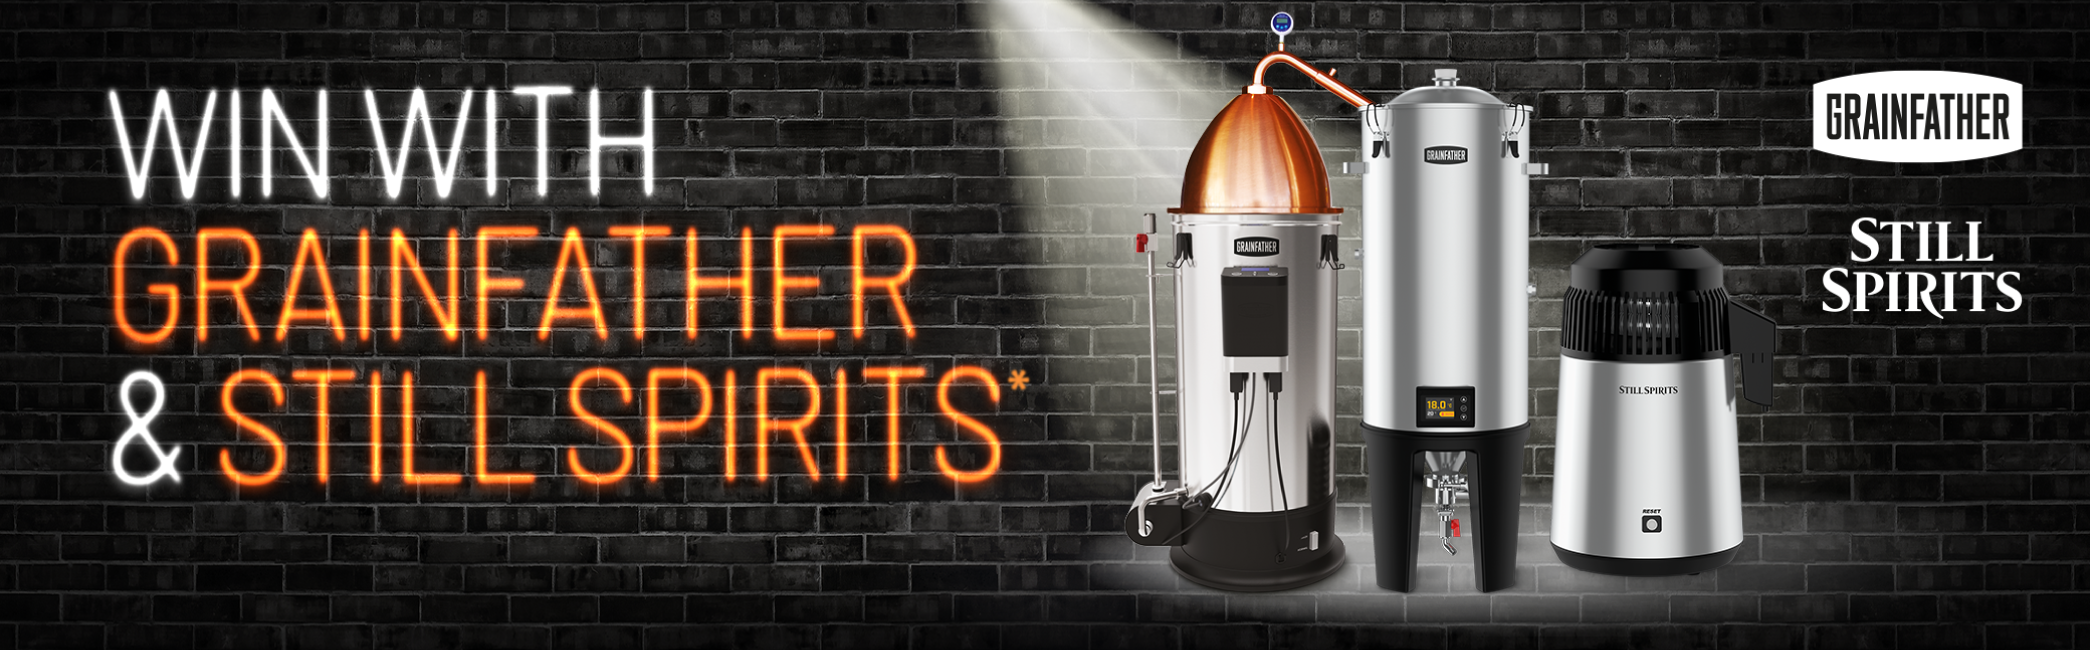 Win With Grainfather & Still Spirits